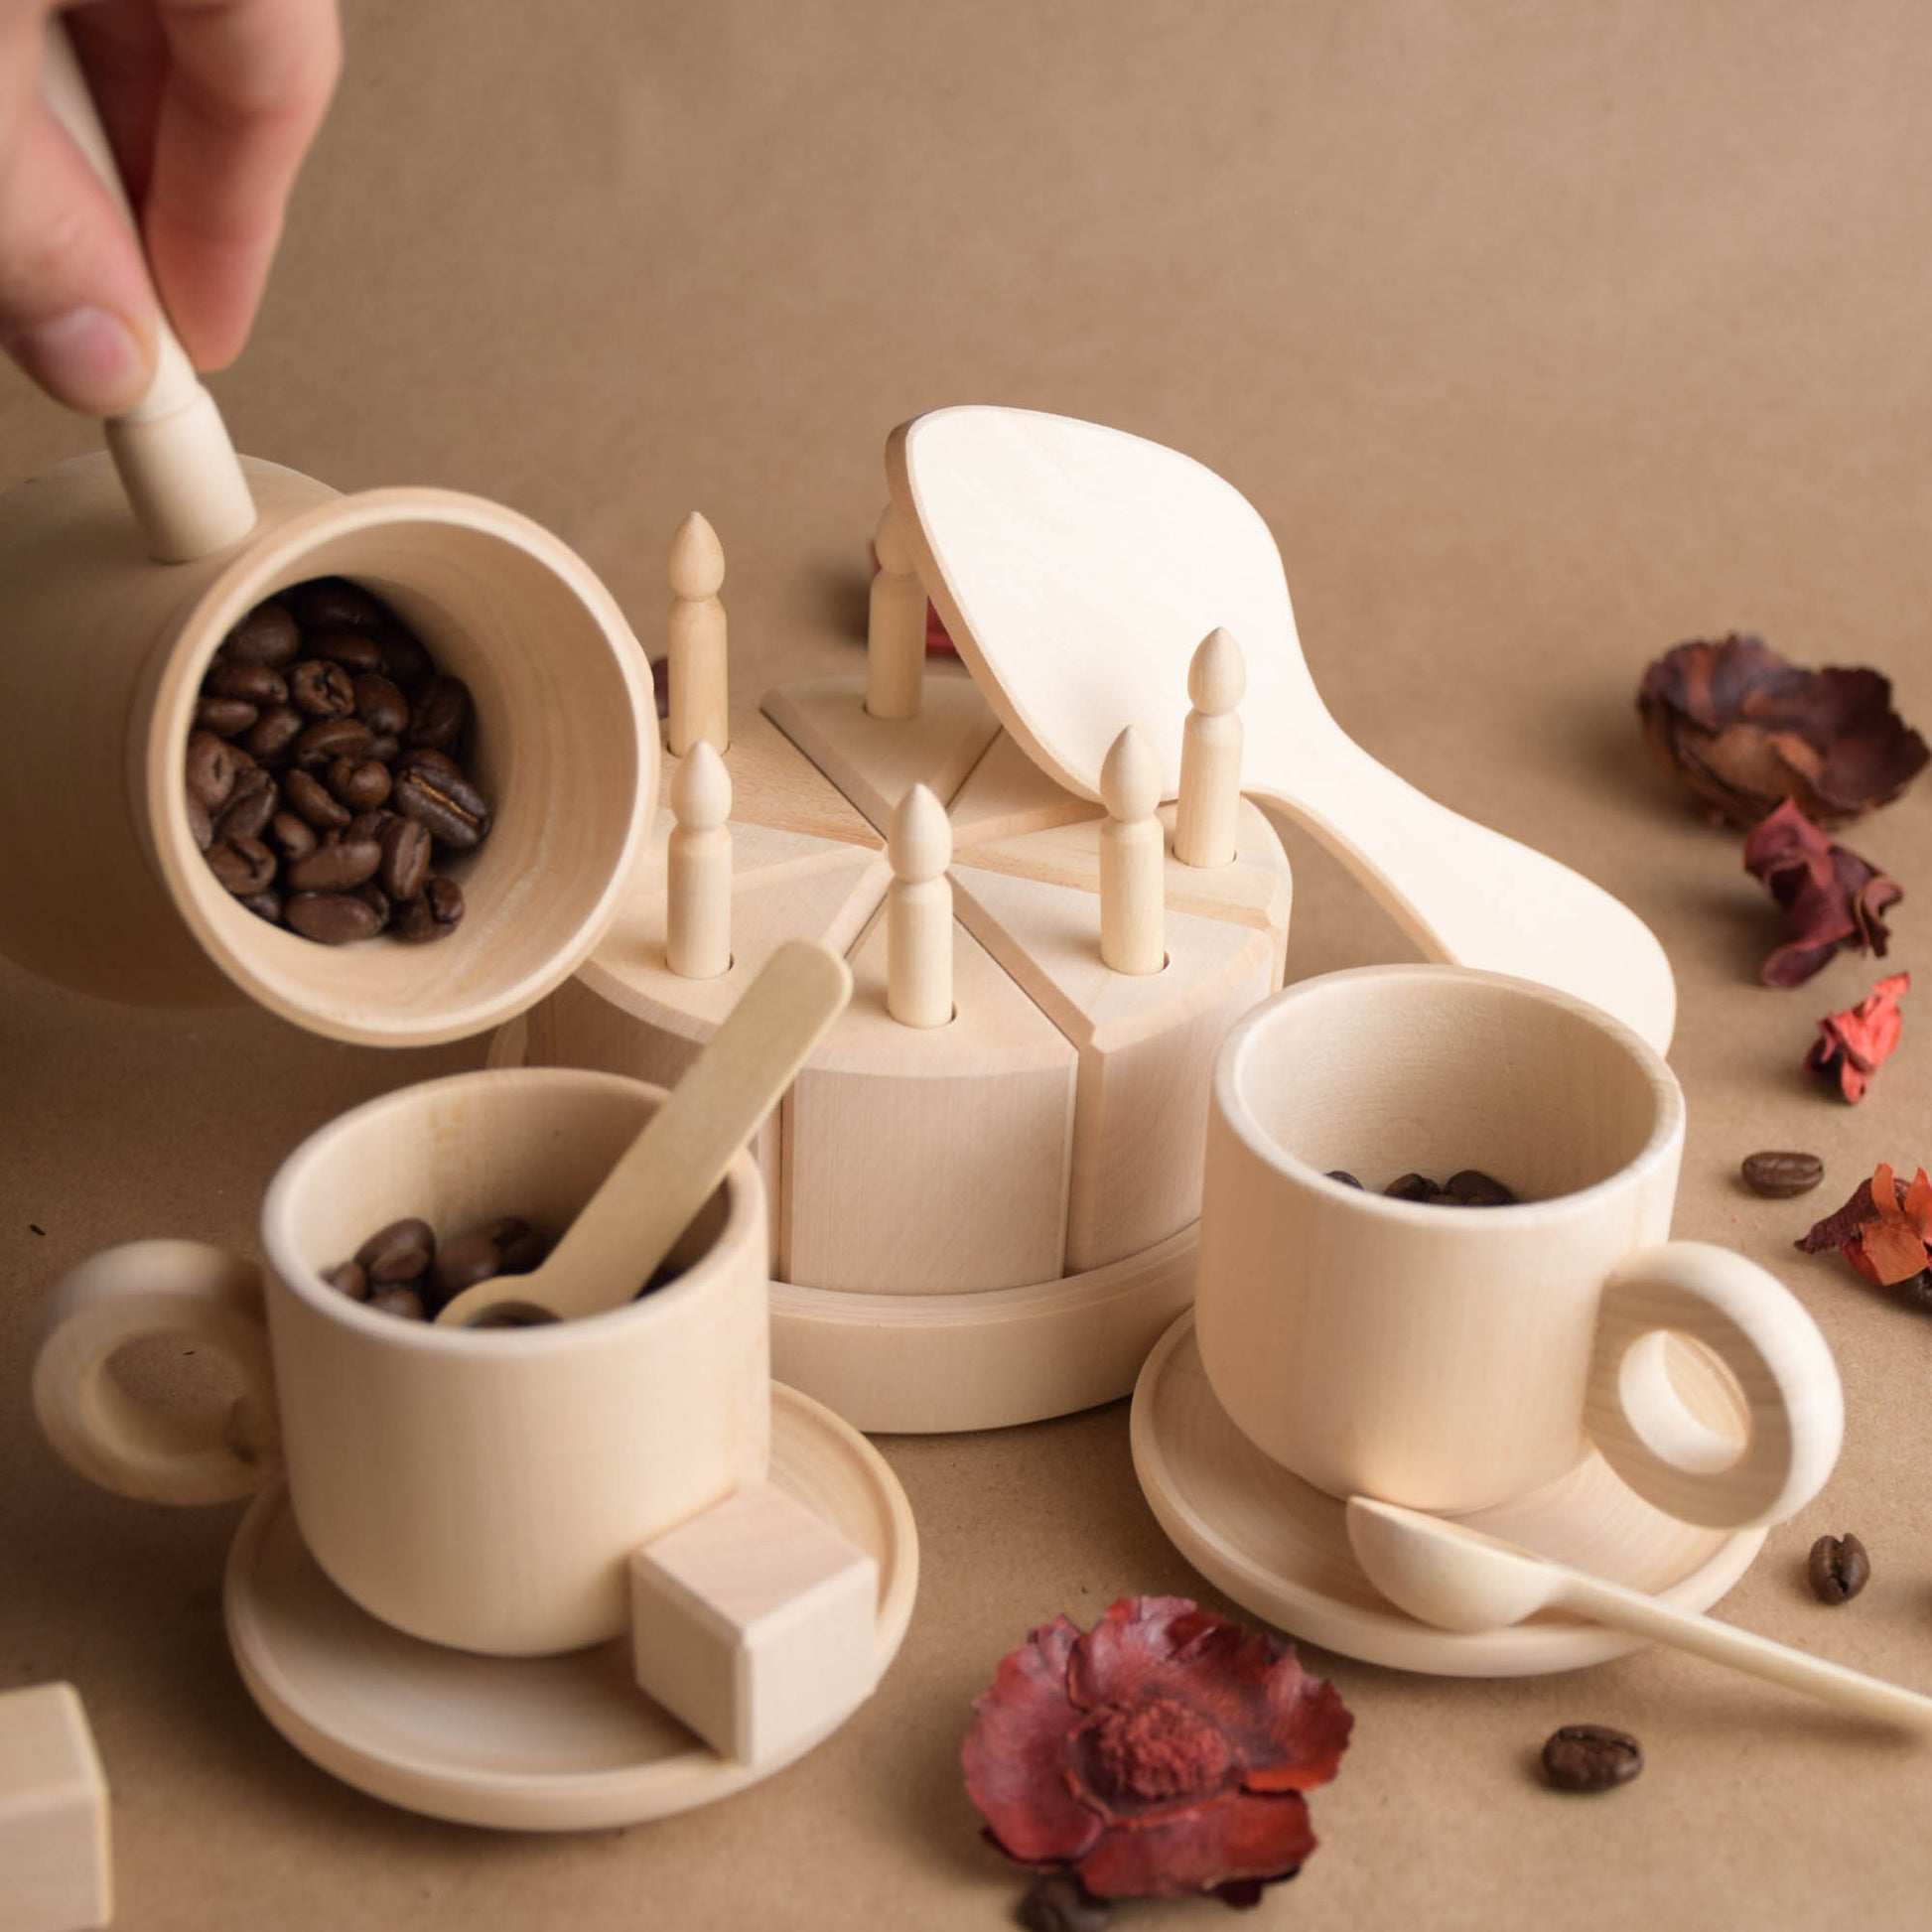 Wooden Tea Set for Kids – Wooden Educational Toy